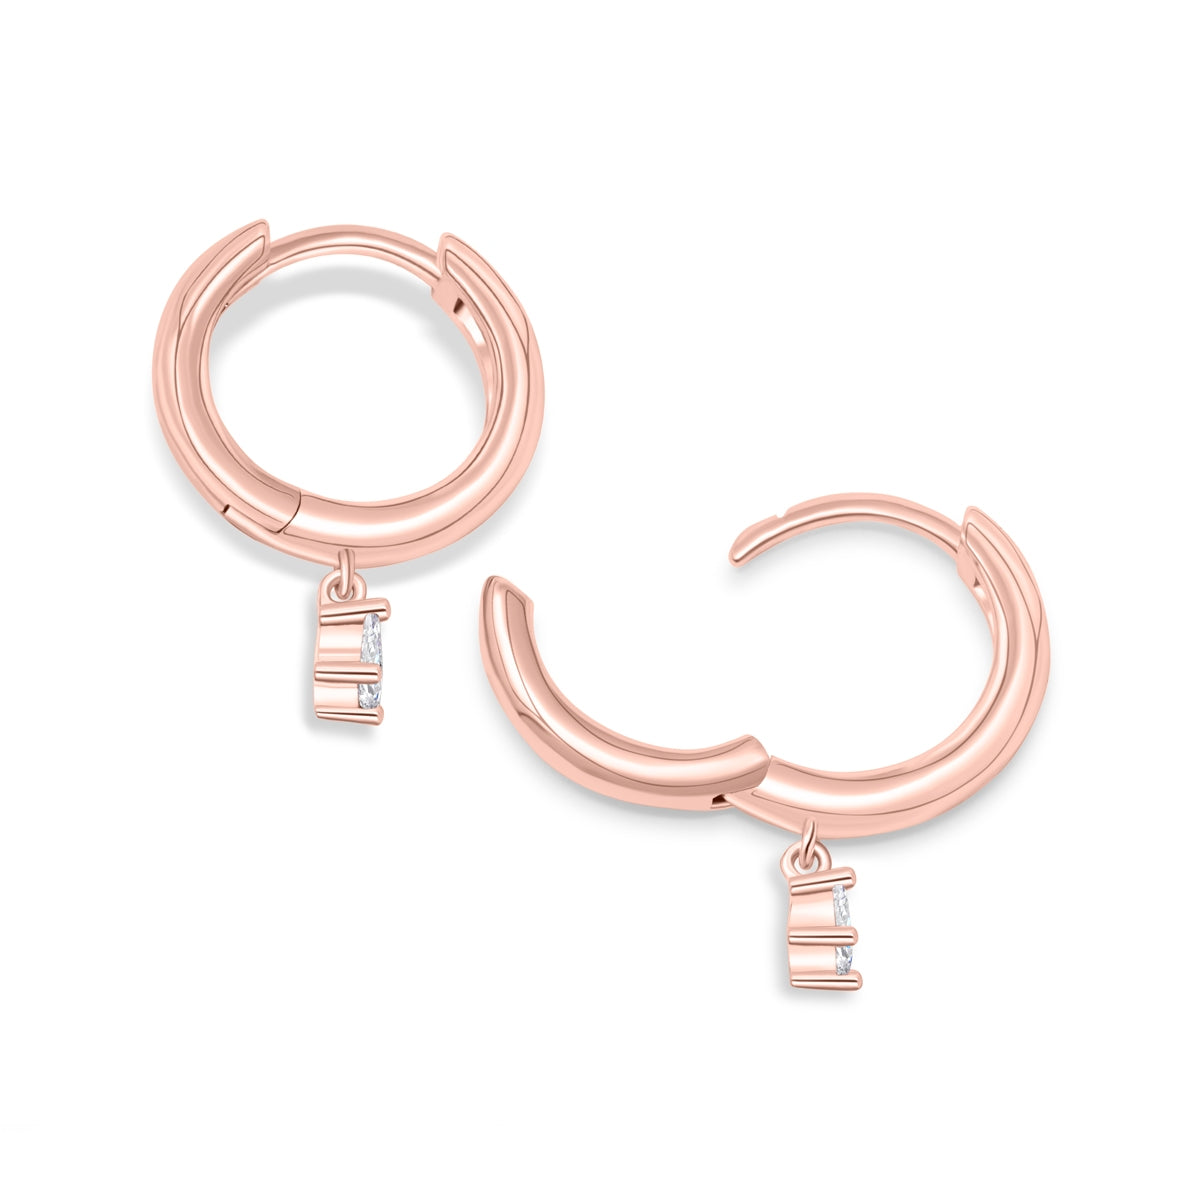 Rose gold huggie earrings with pendant